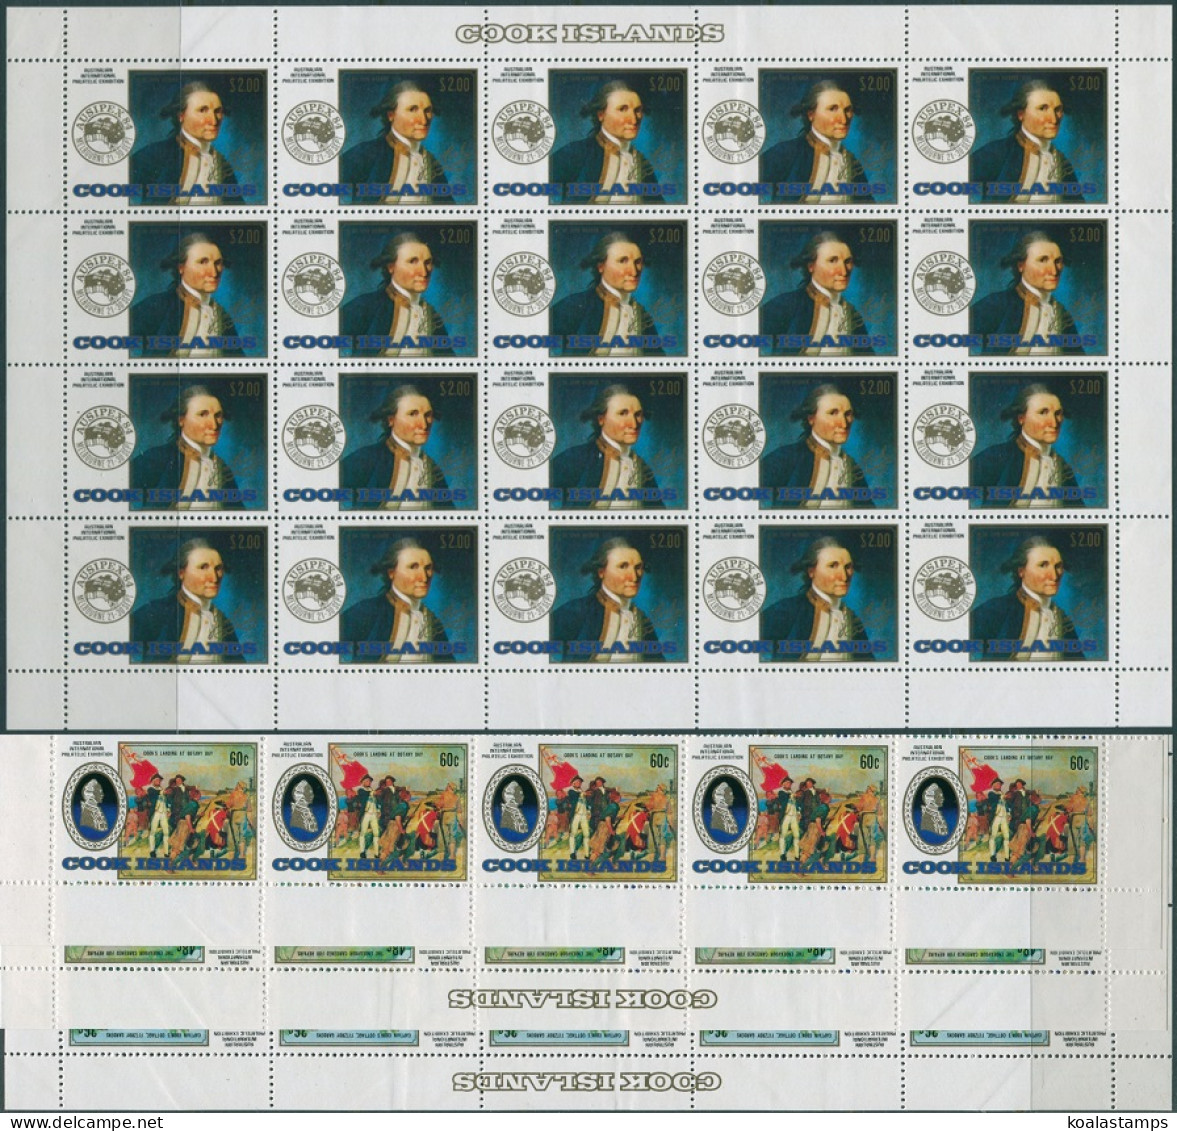 Cook Islands 1984 SG998-1001 Ausipex Stamp Exhibition Sheets Of 20 Set MNH - Cookinseln